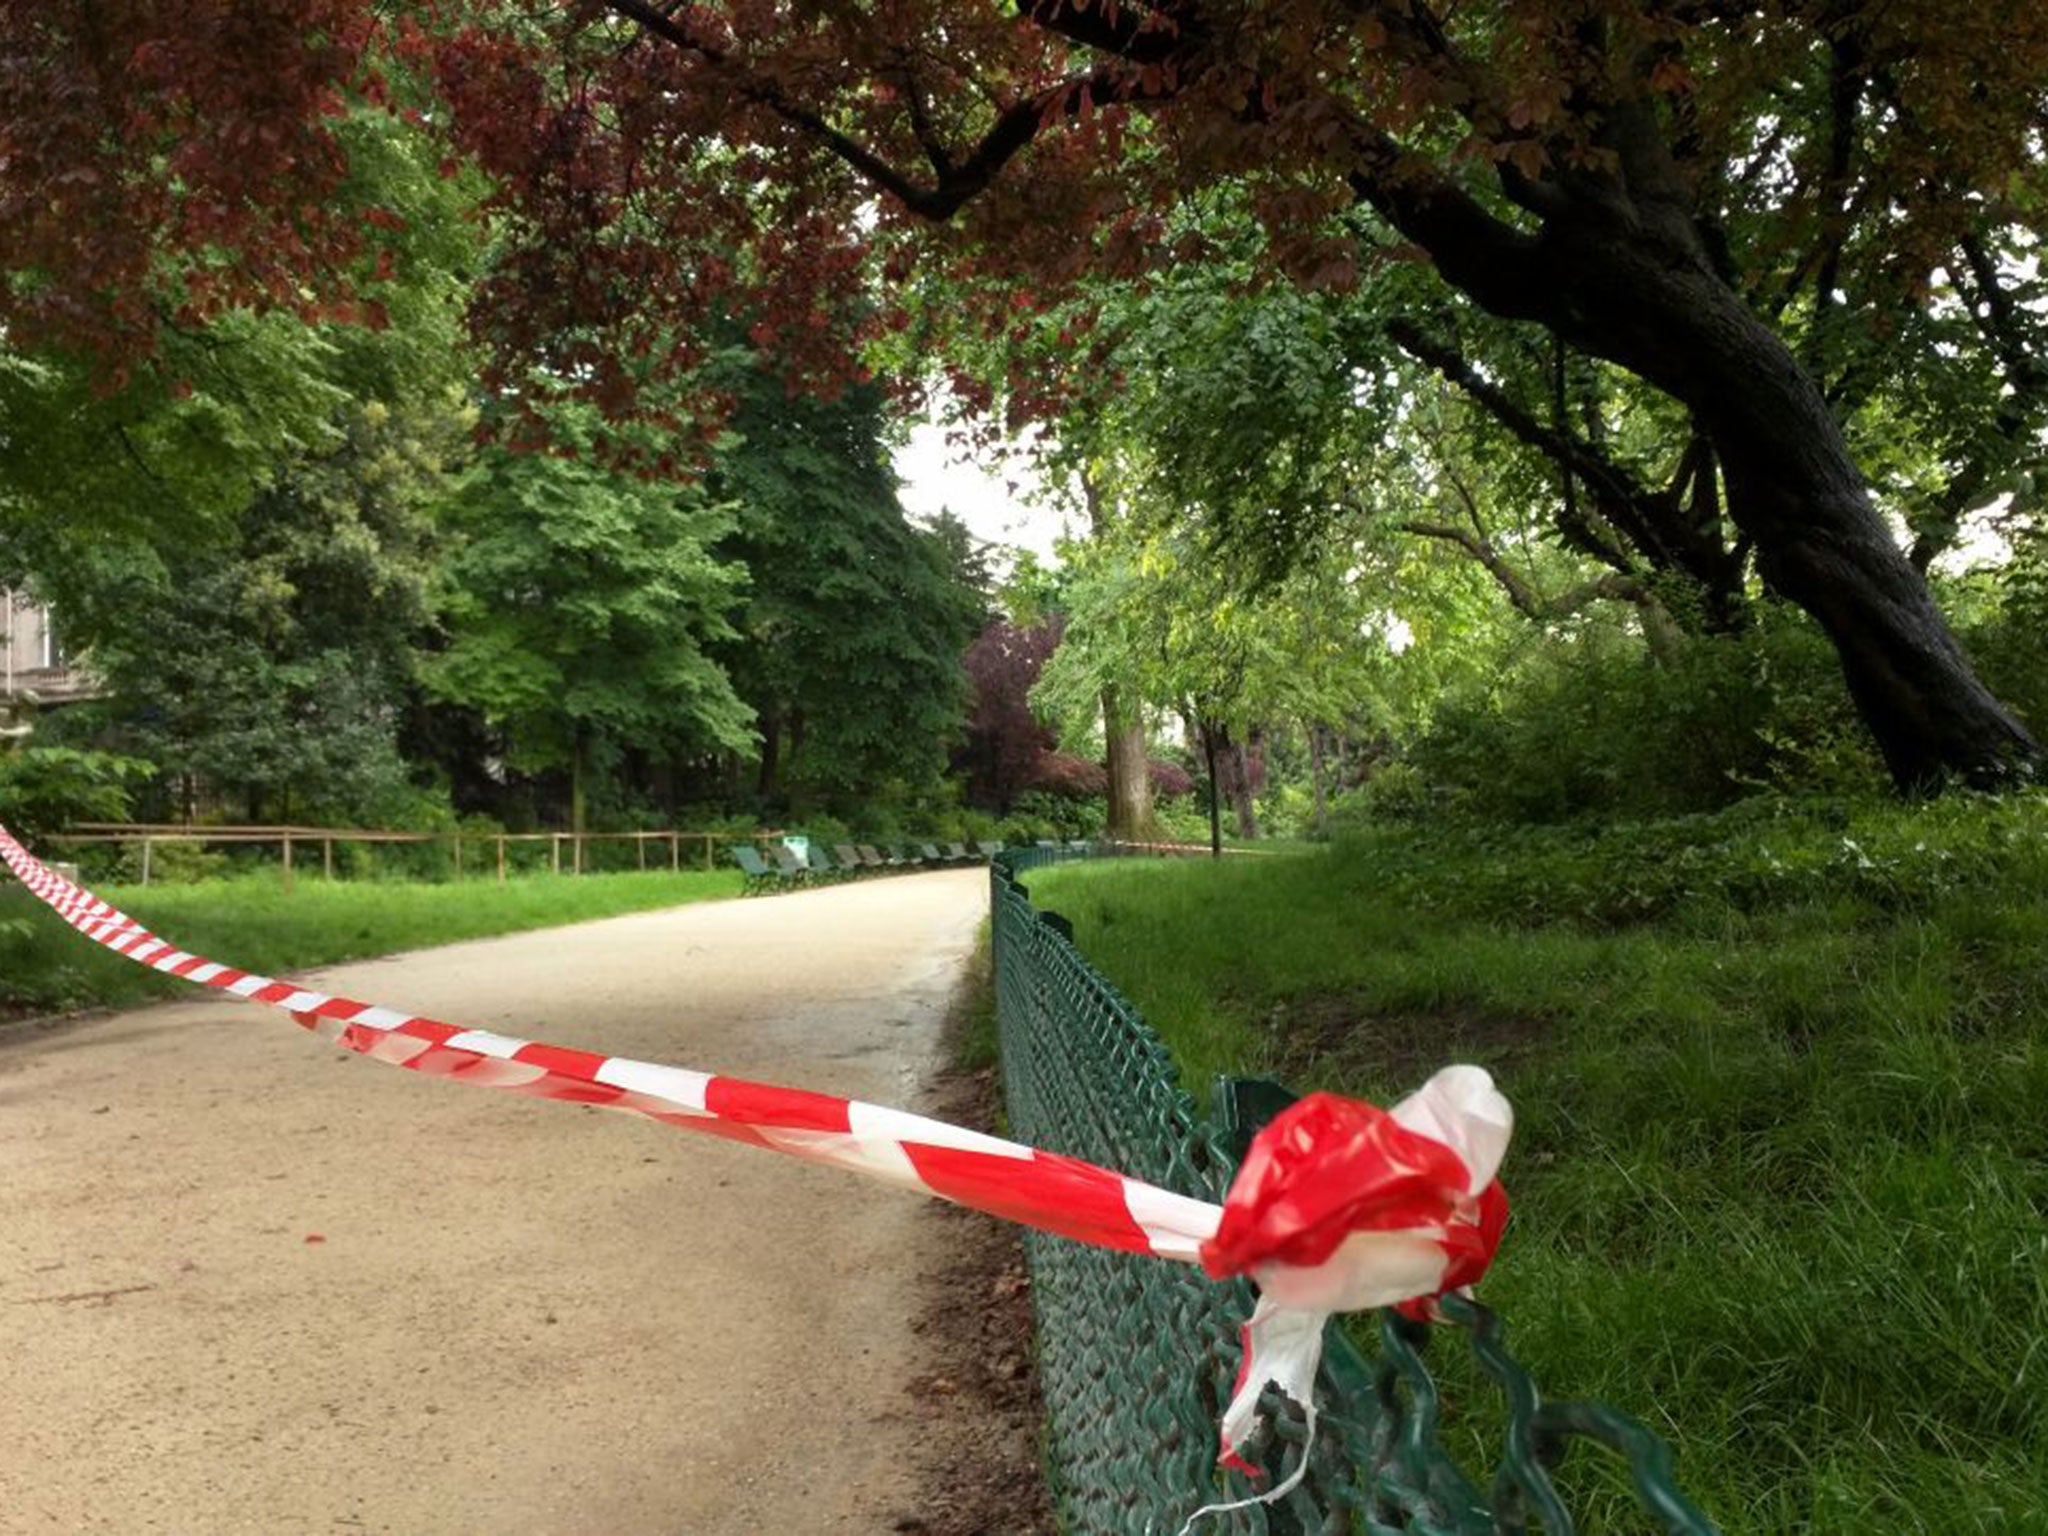 White-and-red tape is strung across a sandy pathway through Paris's Park Monceau after the lightning stike